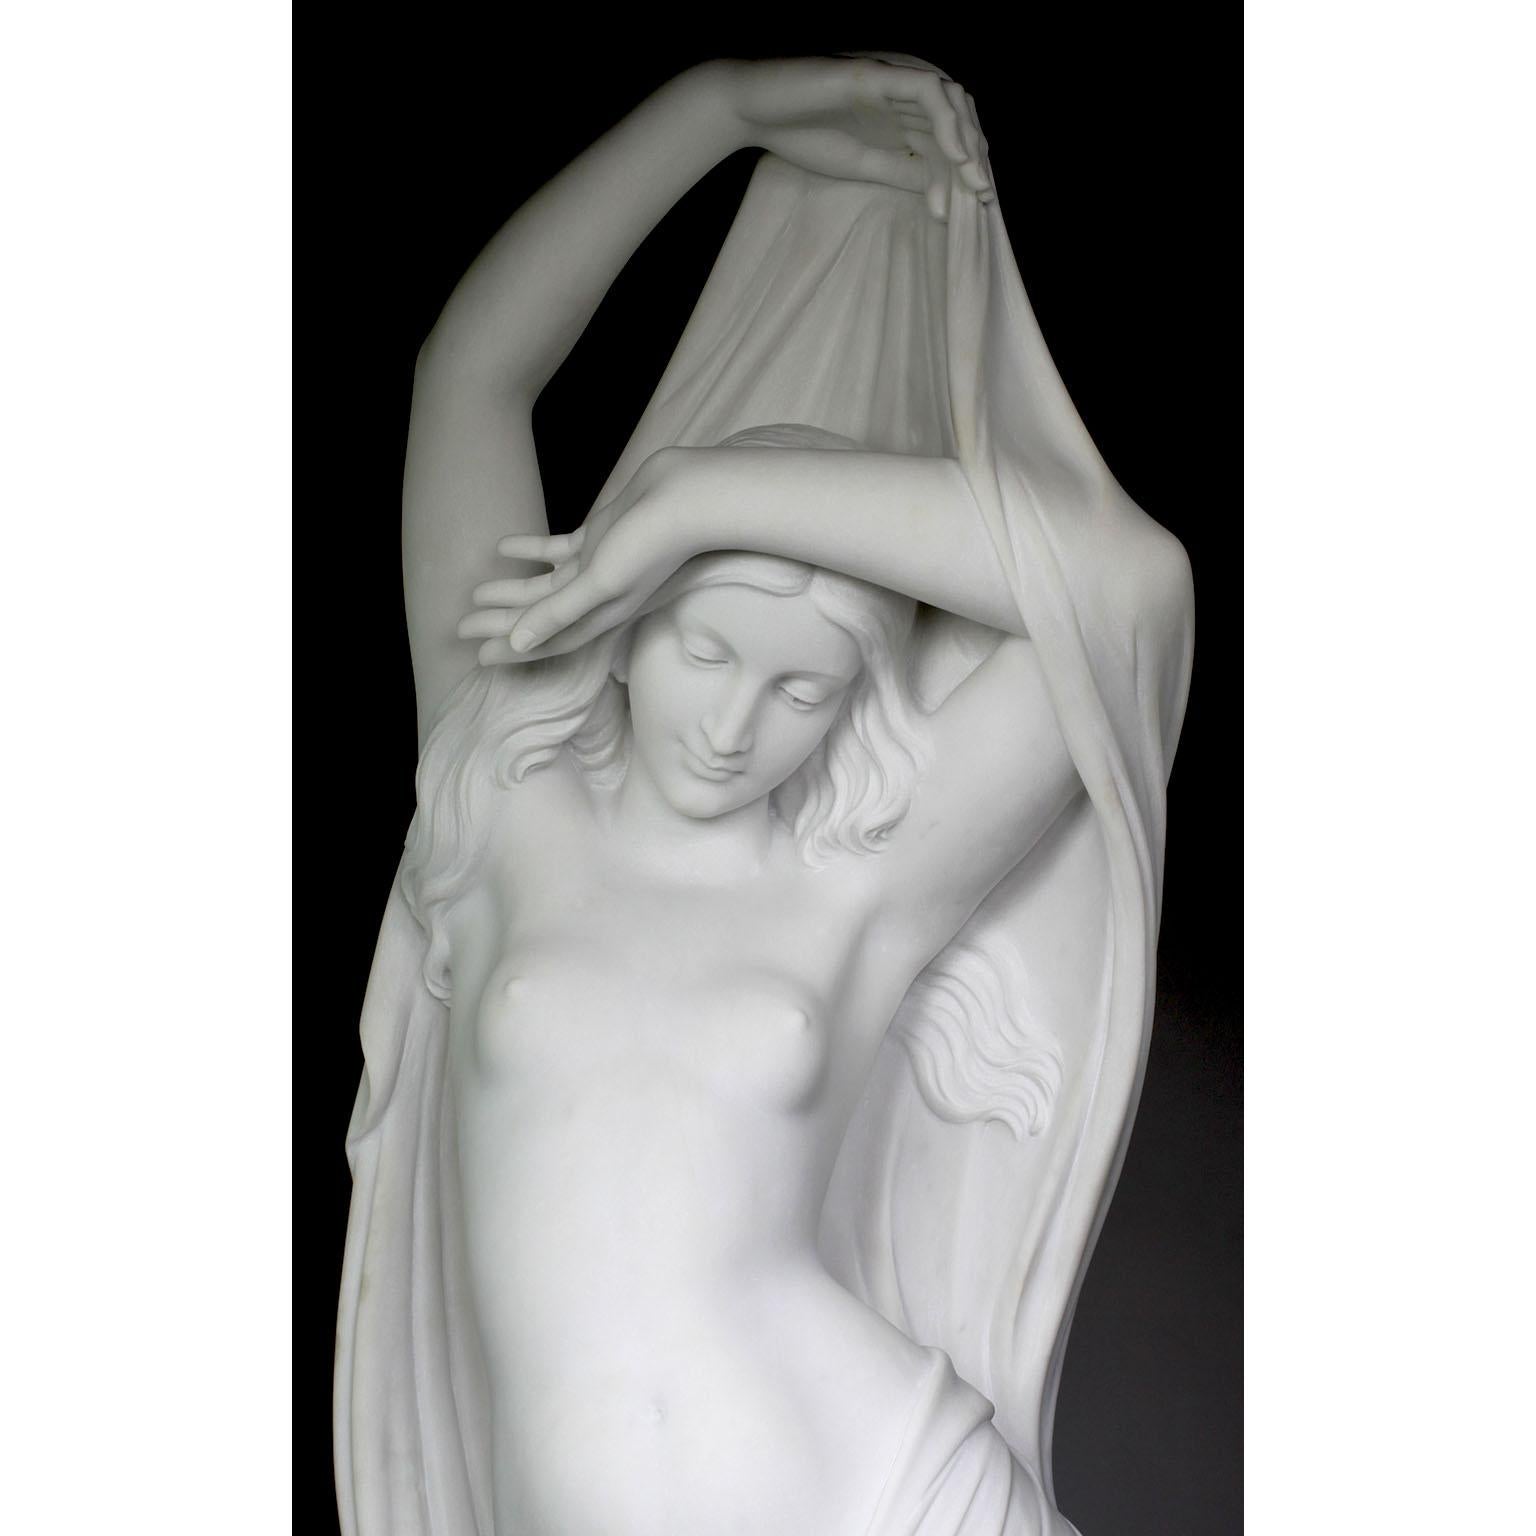 Large Carved White Marble Sculpture of 